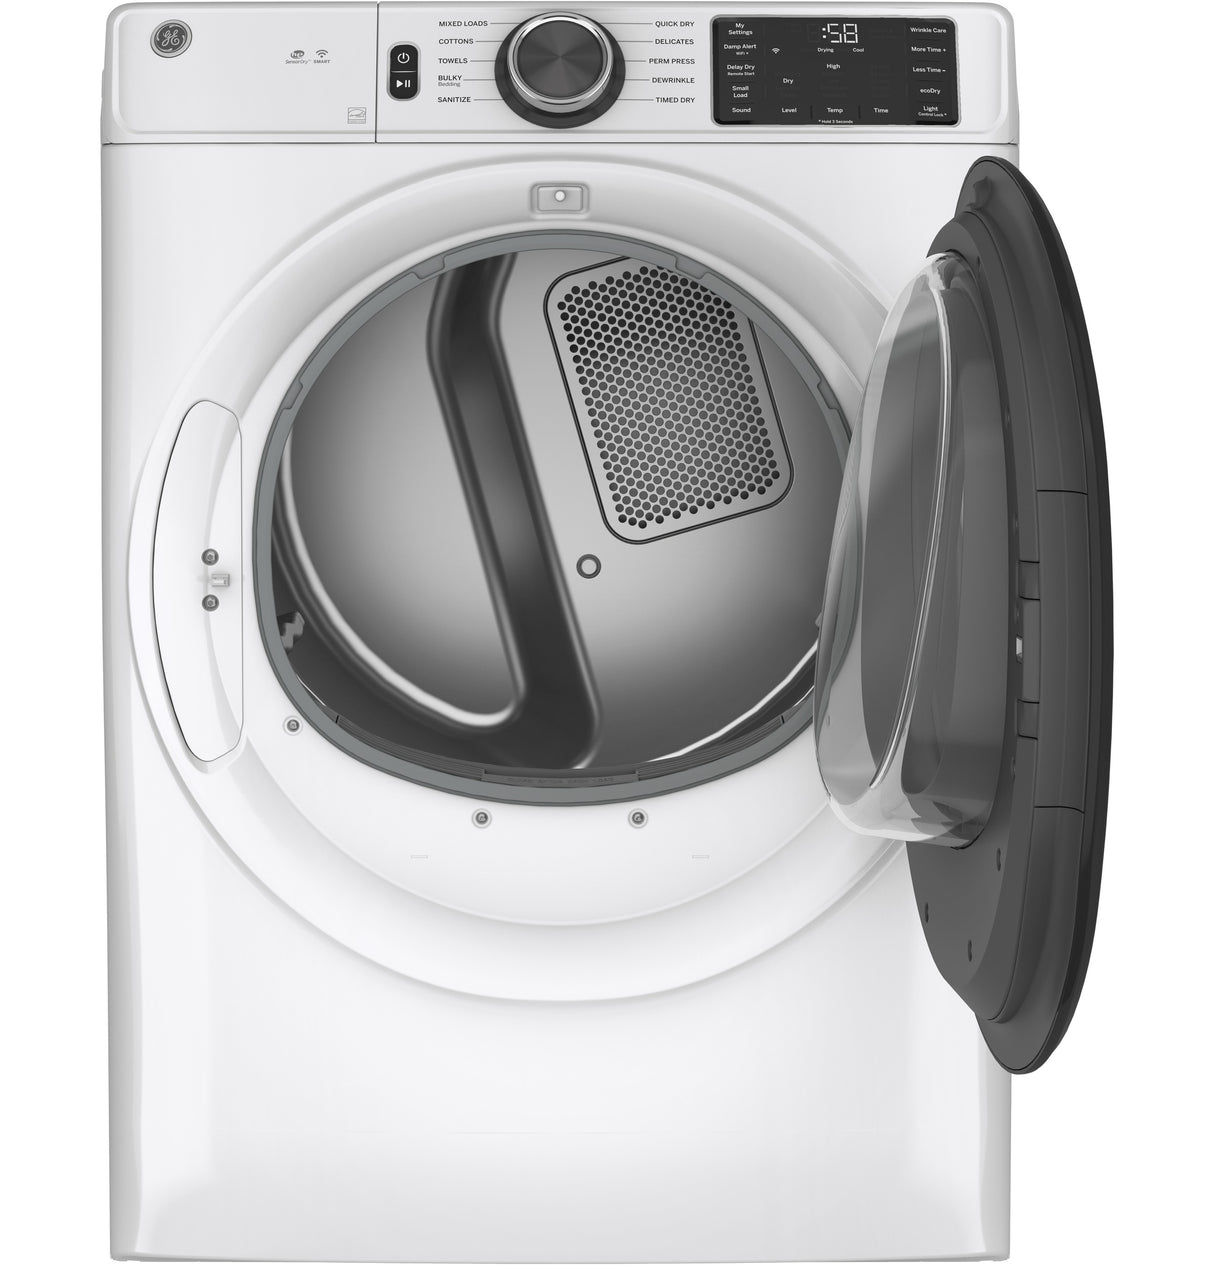 GE(R) ENERGY STAR(R) 7.8 cu. ft. Capacity Smart Front Load Electric Dryer with Sanitize Cycle - (GFD55ESSNWW)